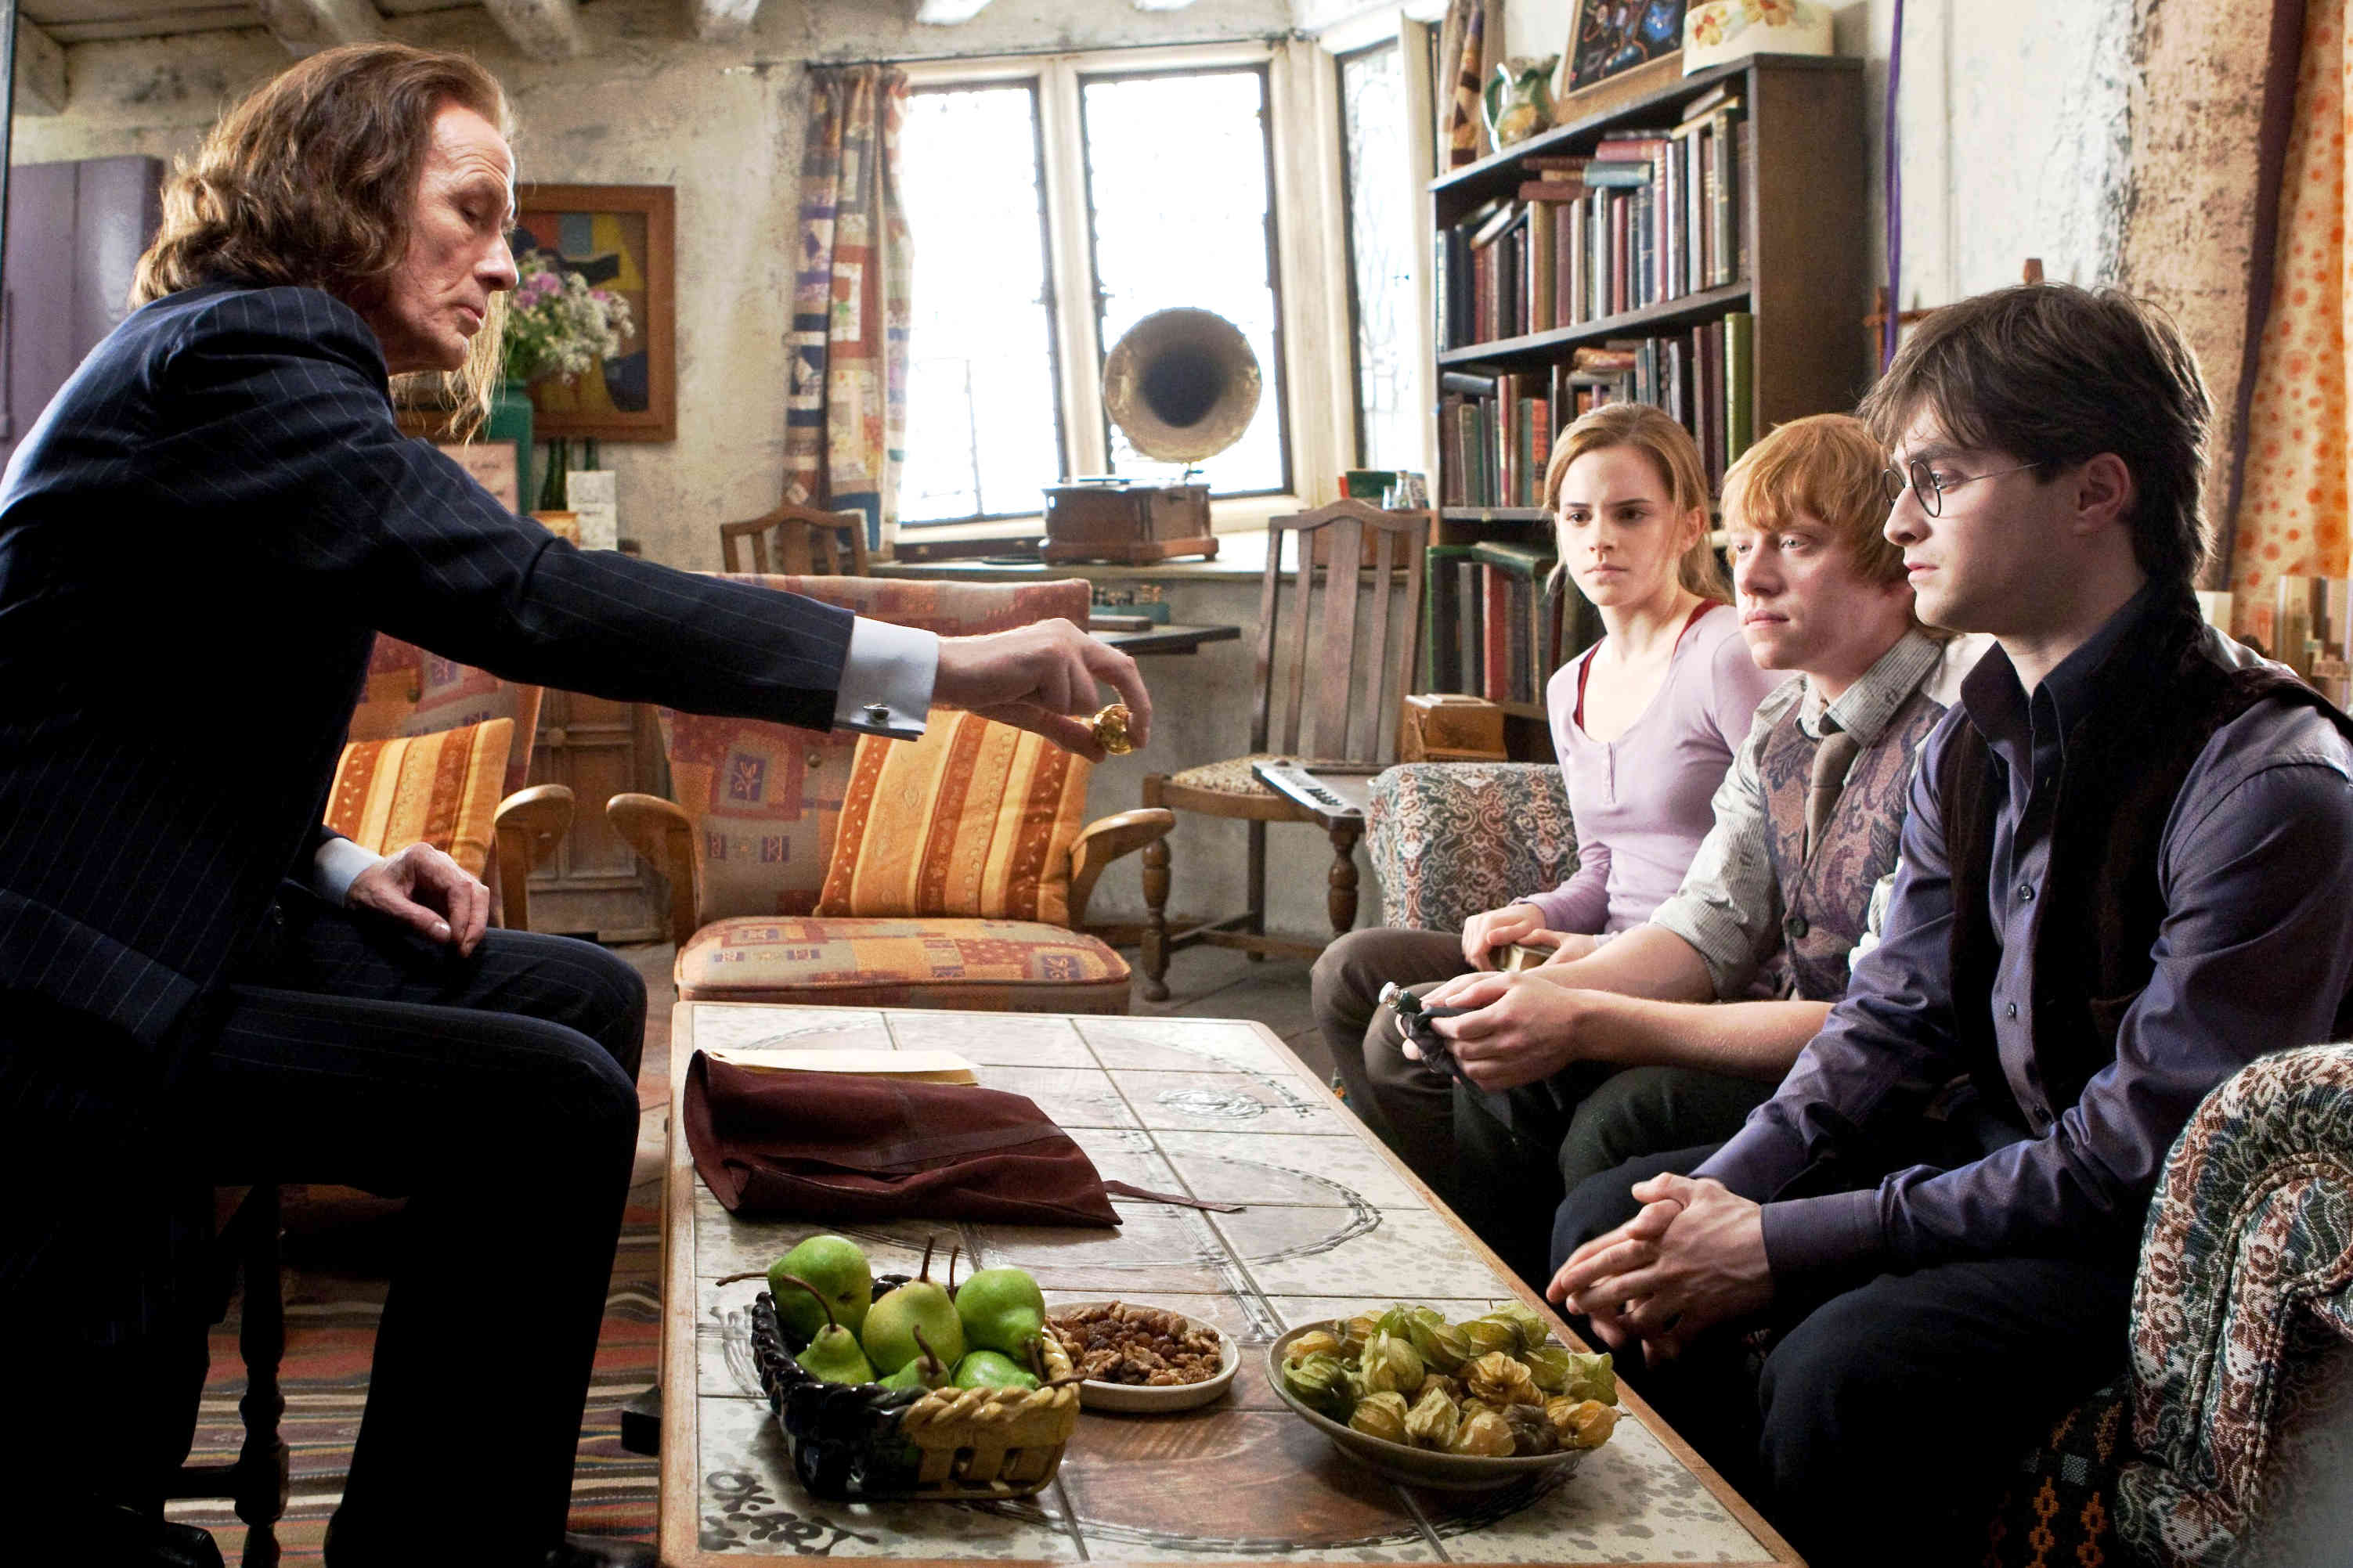 Bill Nighy, Daniel Radcliffe, Rupert Grint and Emma Watson in Warner Bros. Pictures' Harry Potter and the Deathly Hallows: Part I (2010)